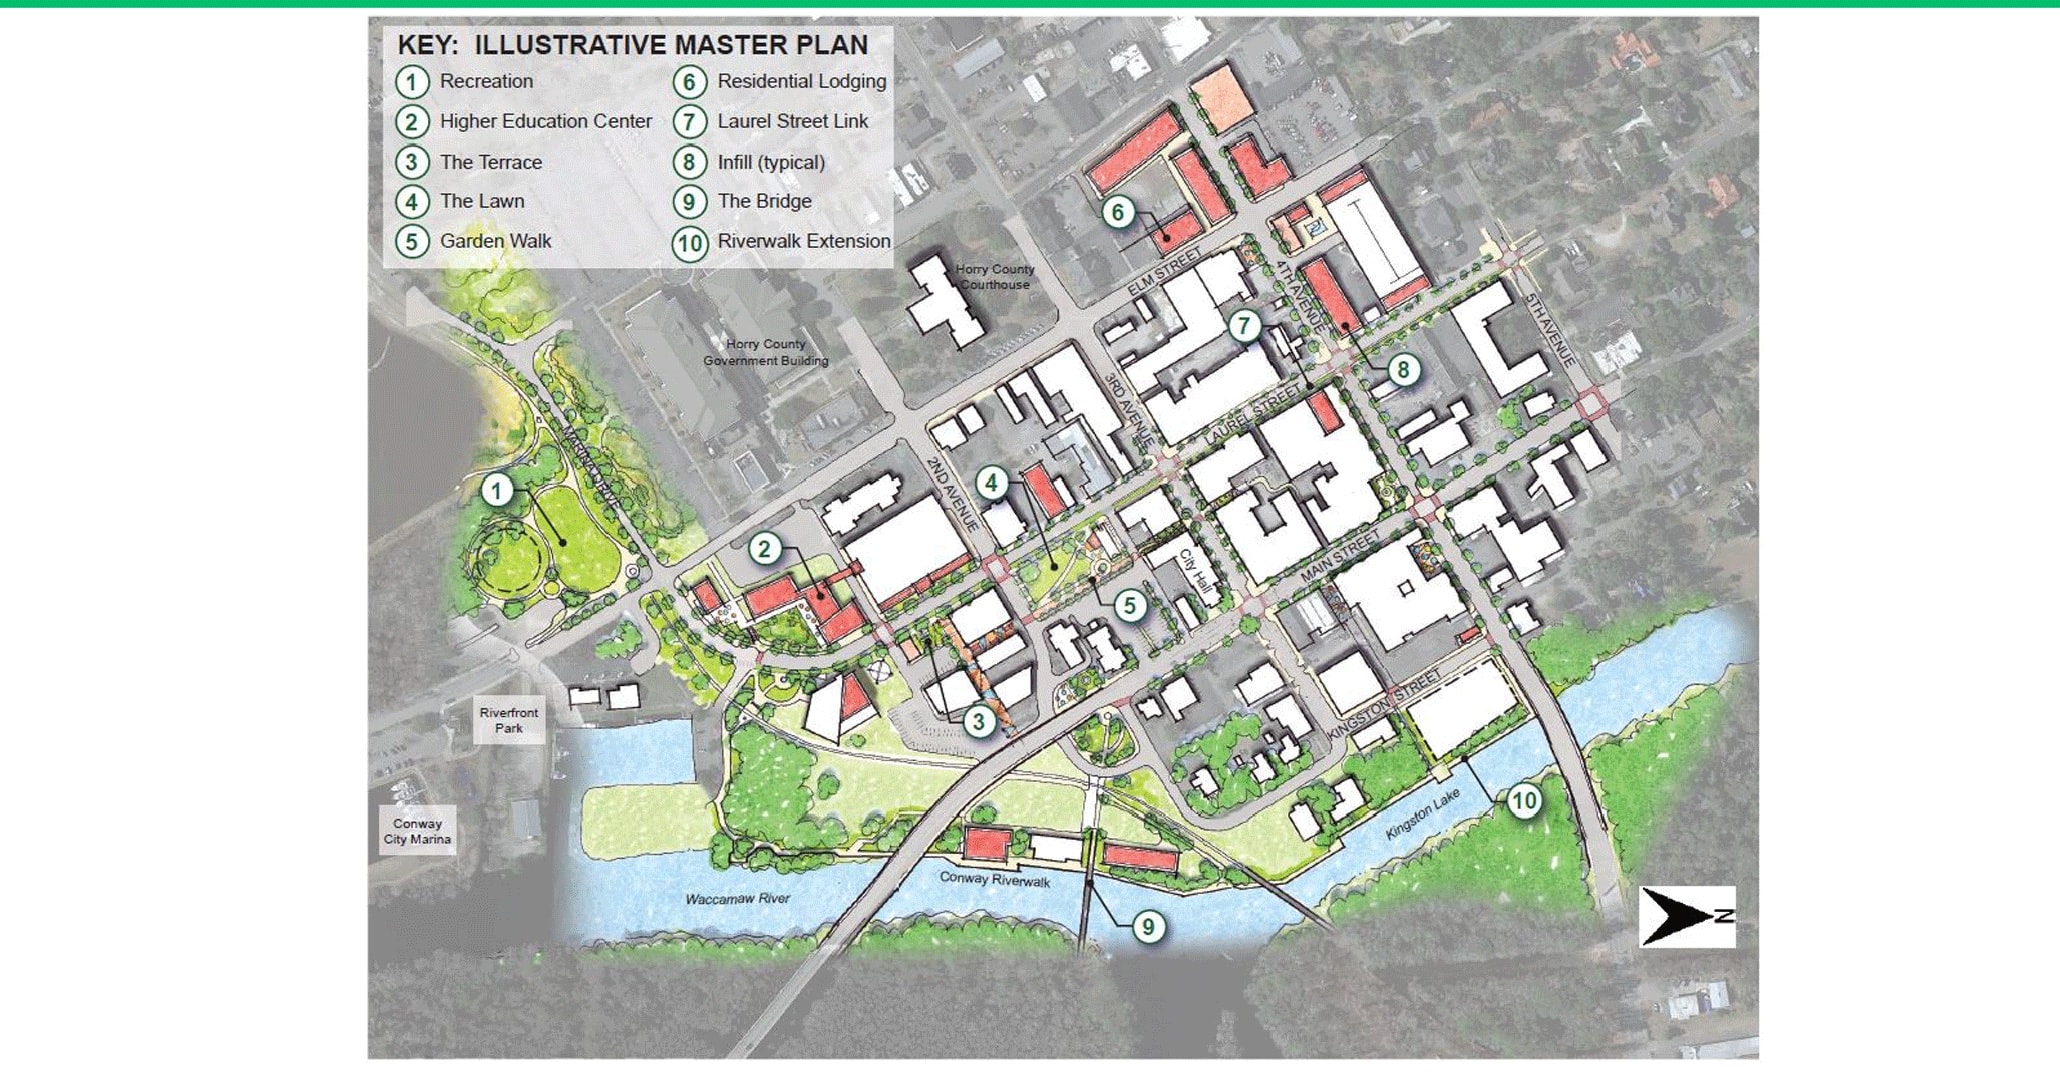 BOUDREAUX planners worked to develop a riverfront master plan for the City of Conway, SC